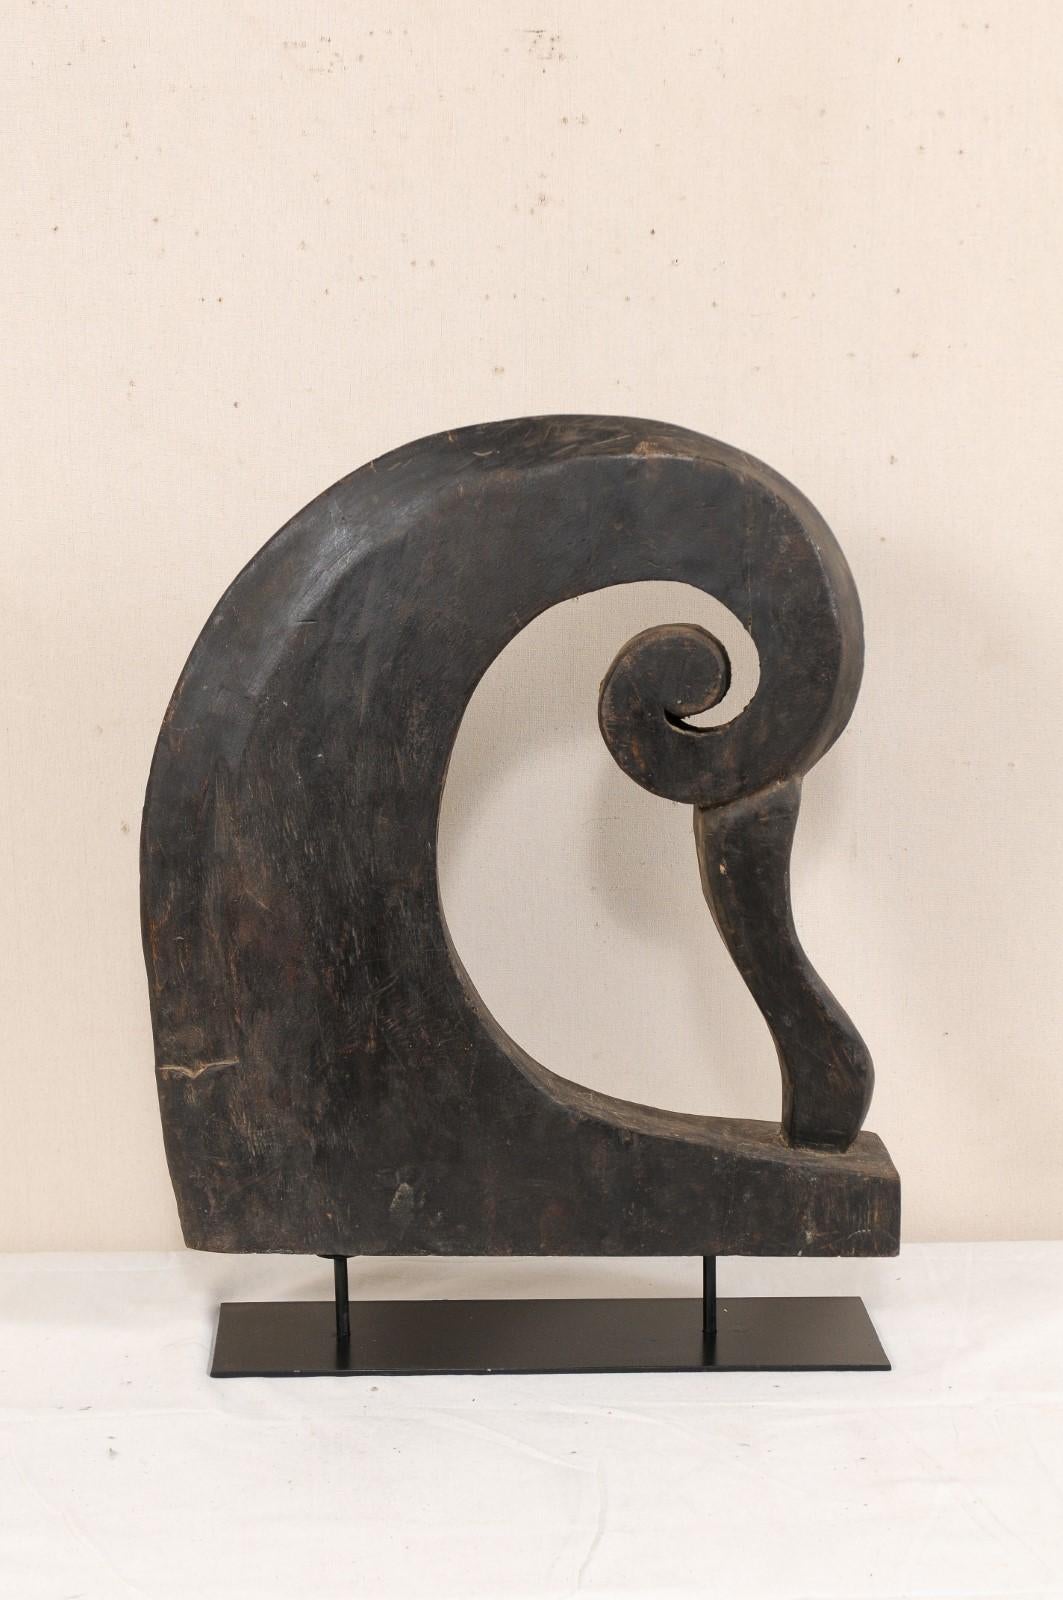 A South Indian (Kerala) wooden boat prow from the mid-20th century, with custom stand. This vintage hand carved boat prow from Kerala is adorn with pierced curling volute, reminiscent of a curling wave. It is supported upon a custom black iron